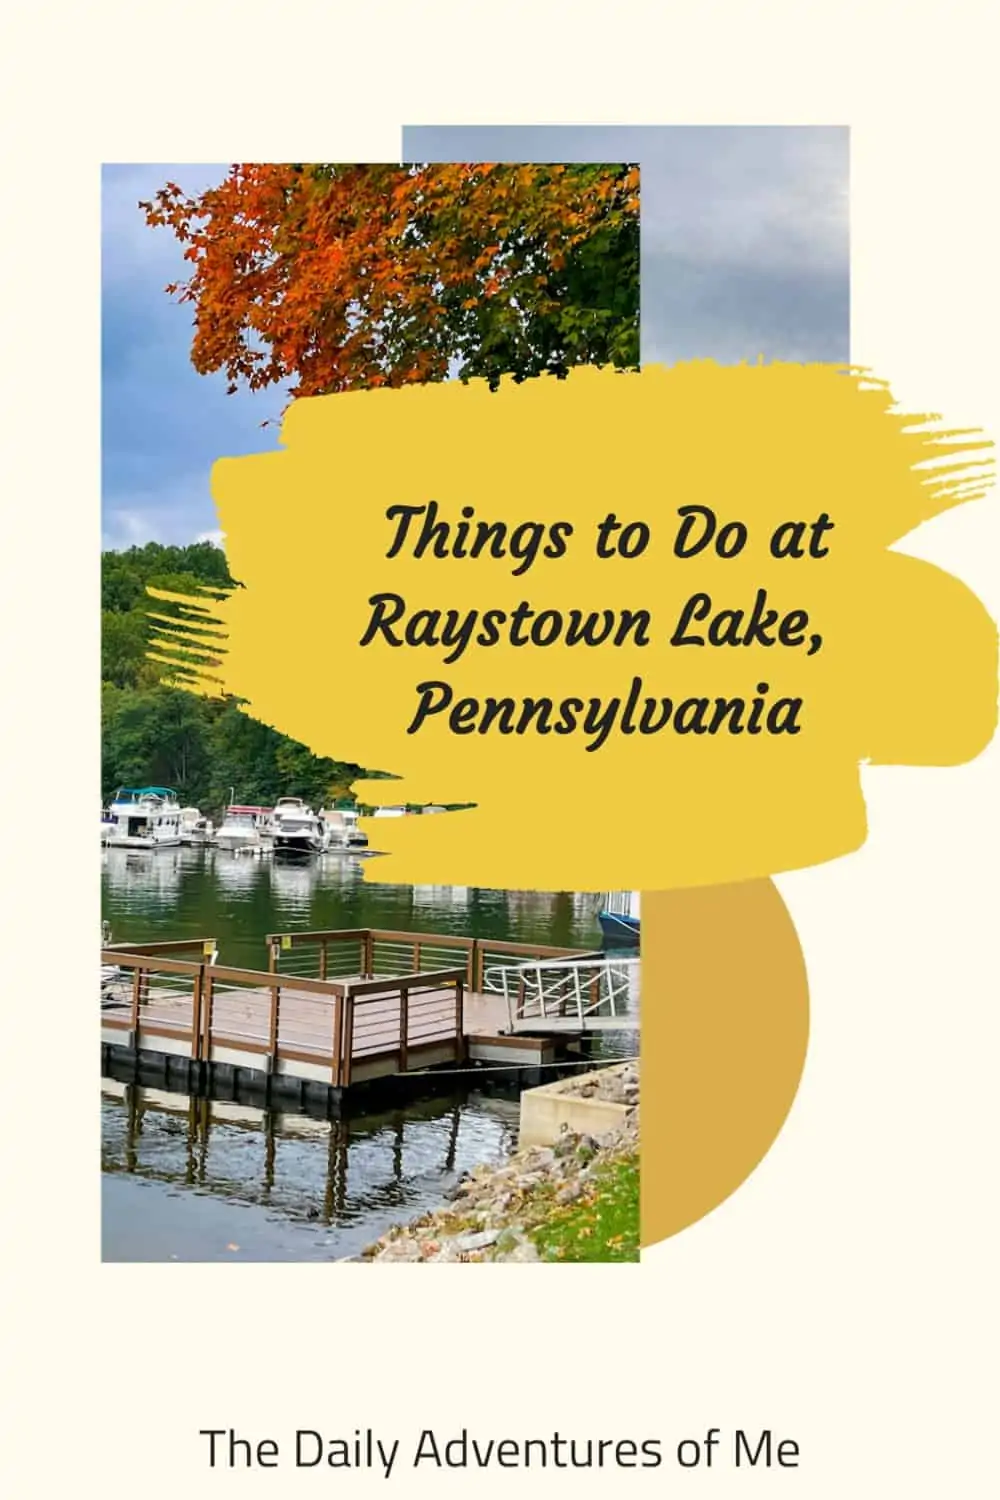 Raystown Lake is the largest lake within Pennsylvania and the perfect spot to spend some time outdoors. They also have world-class mountain biking. @RaystownLakePA #visitPA #raystownlake